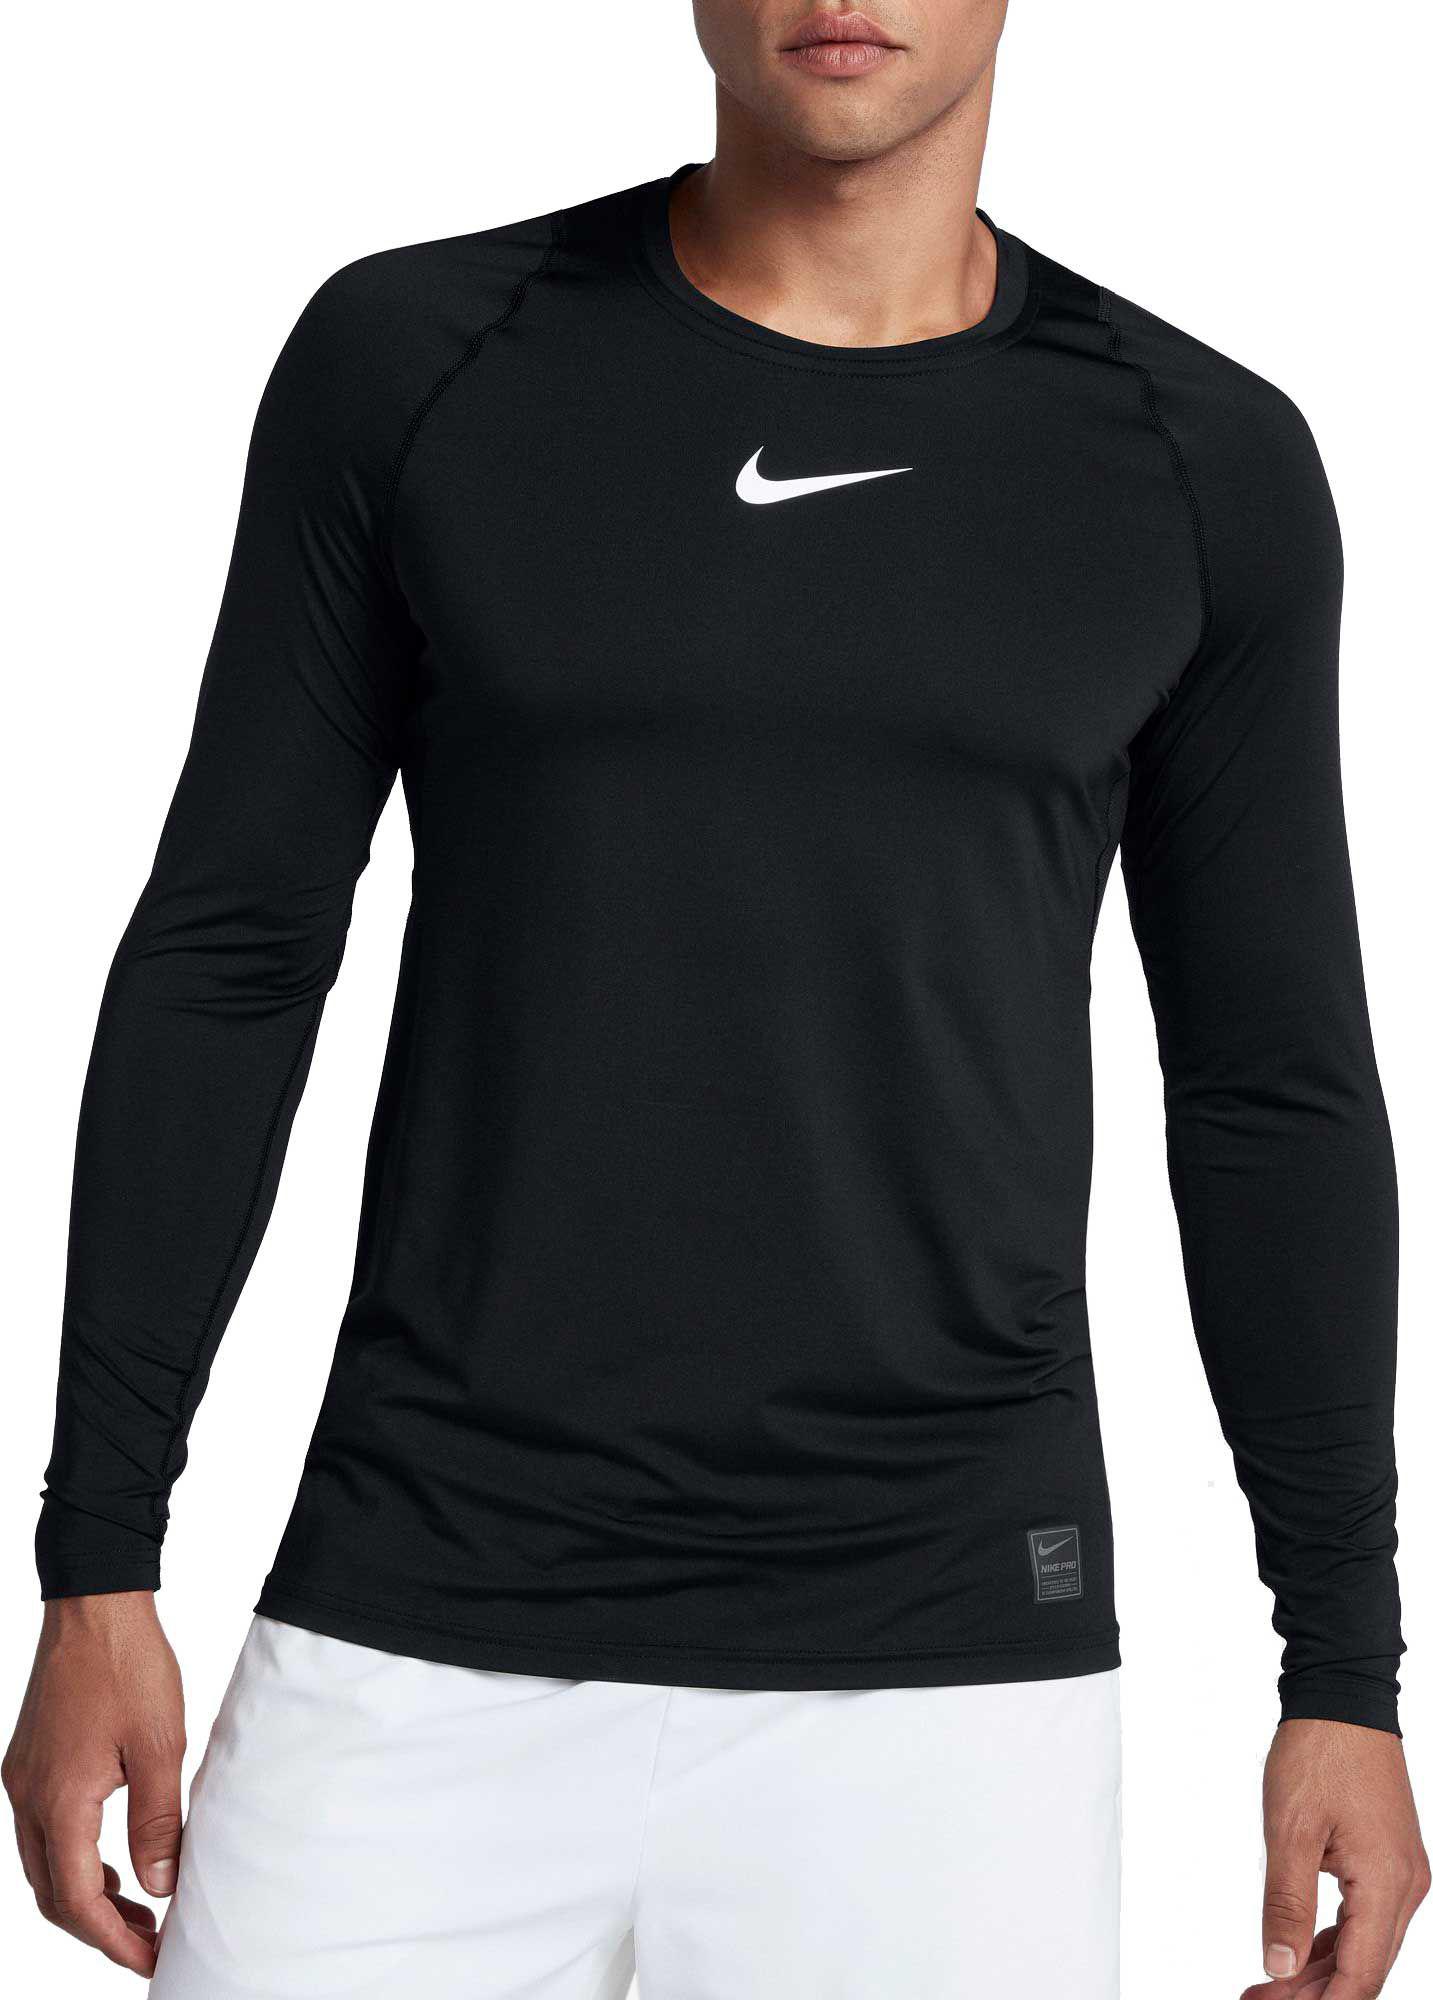 Nike Synthetic Pro Long Sleeve Fitted Shirt in Black/White (Black) for ...